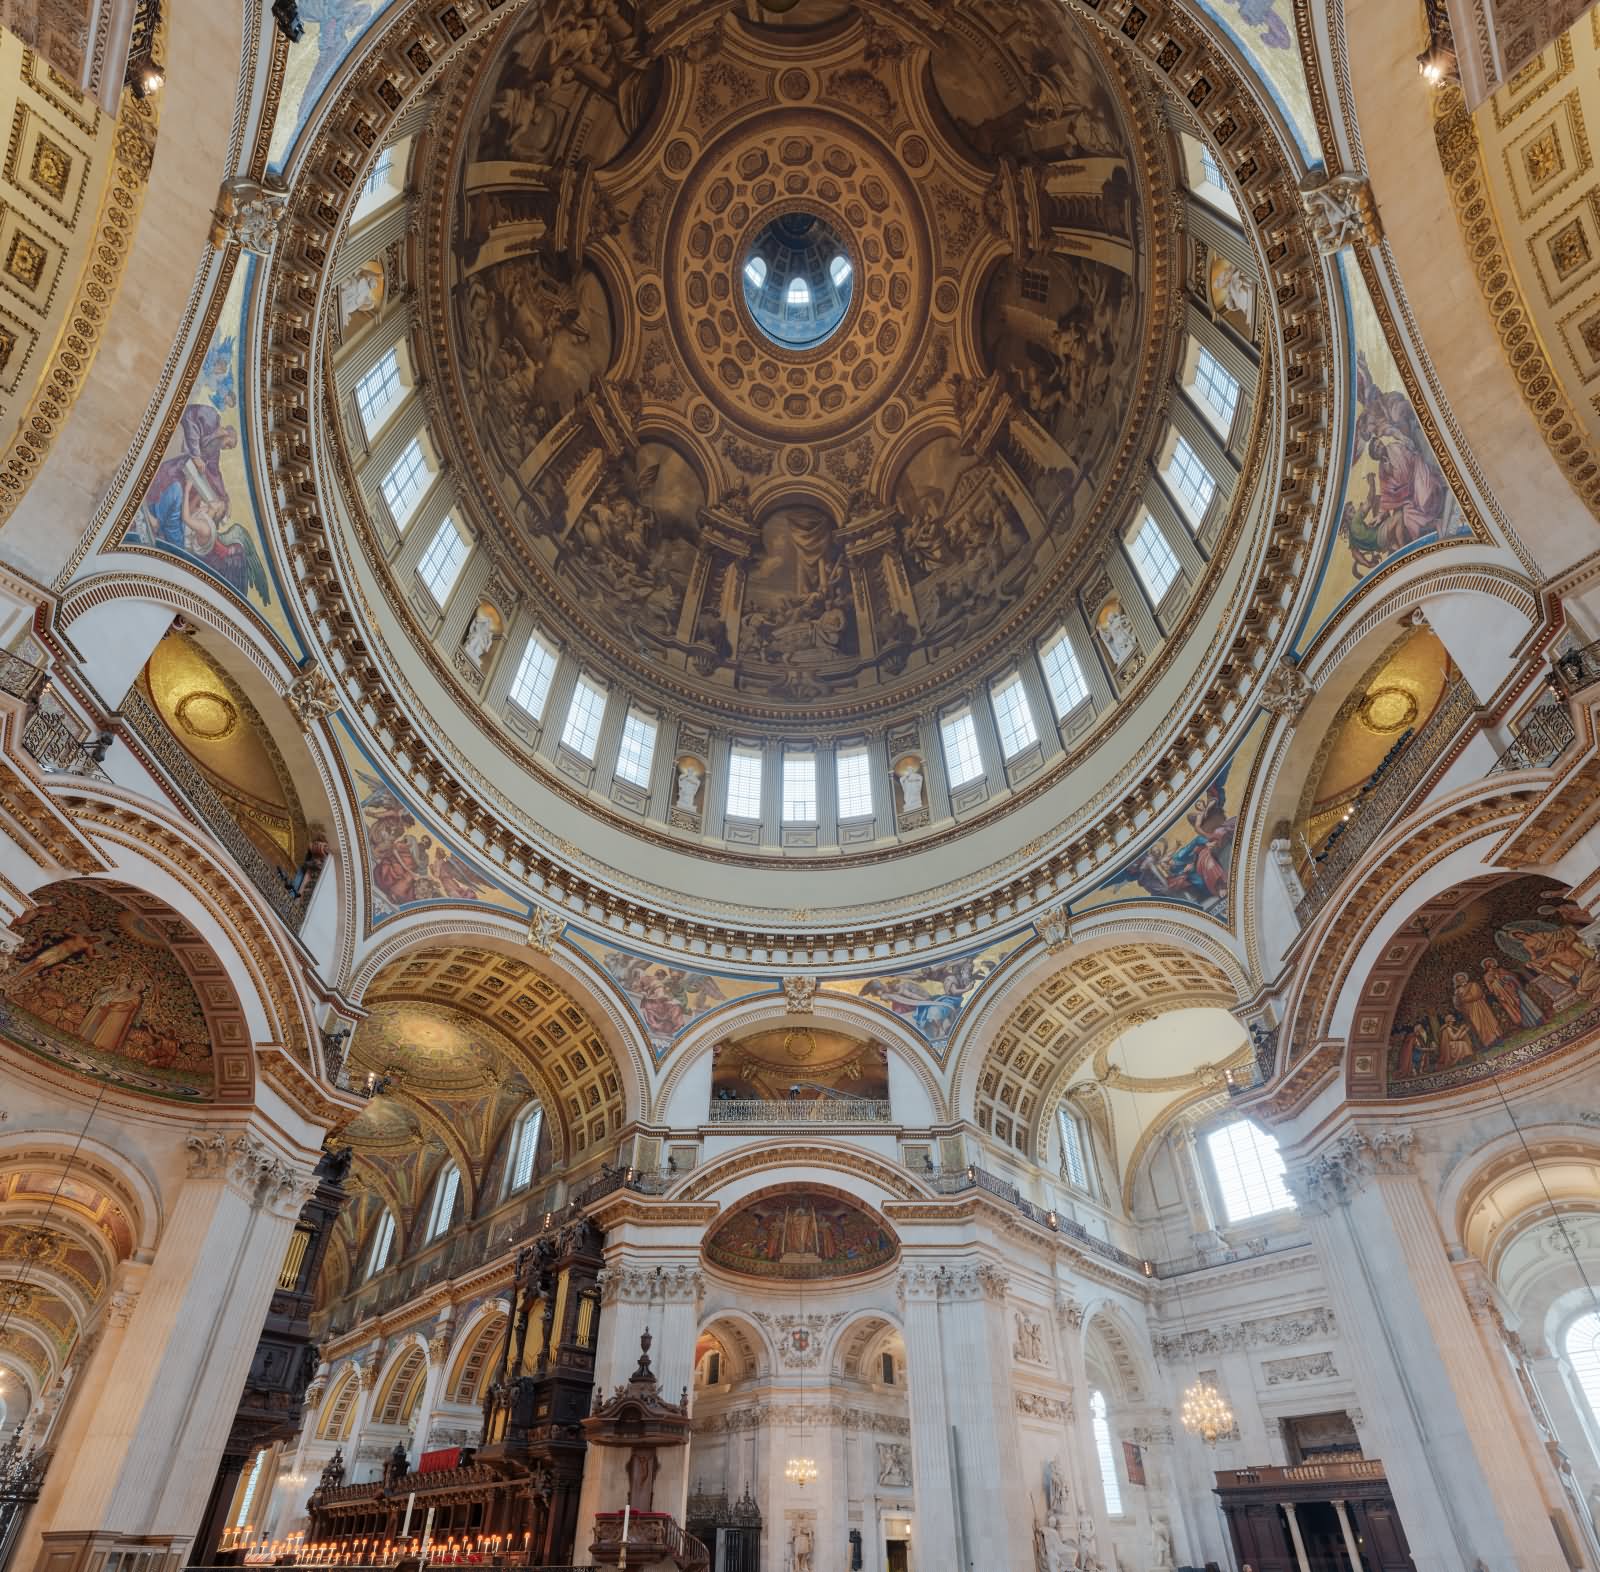 Beautiful Dome Inside St Paul's Cathedral, London